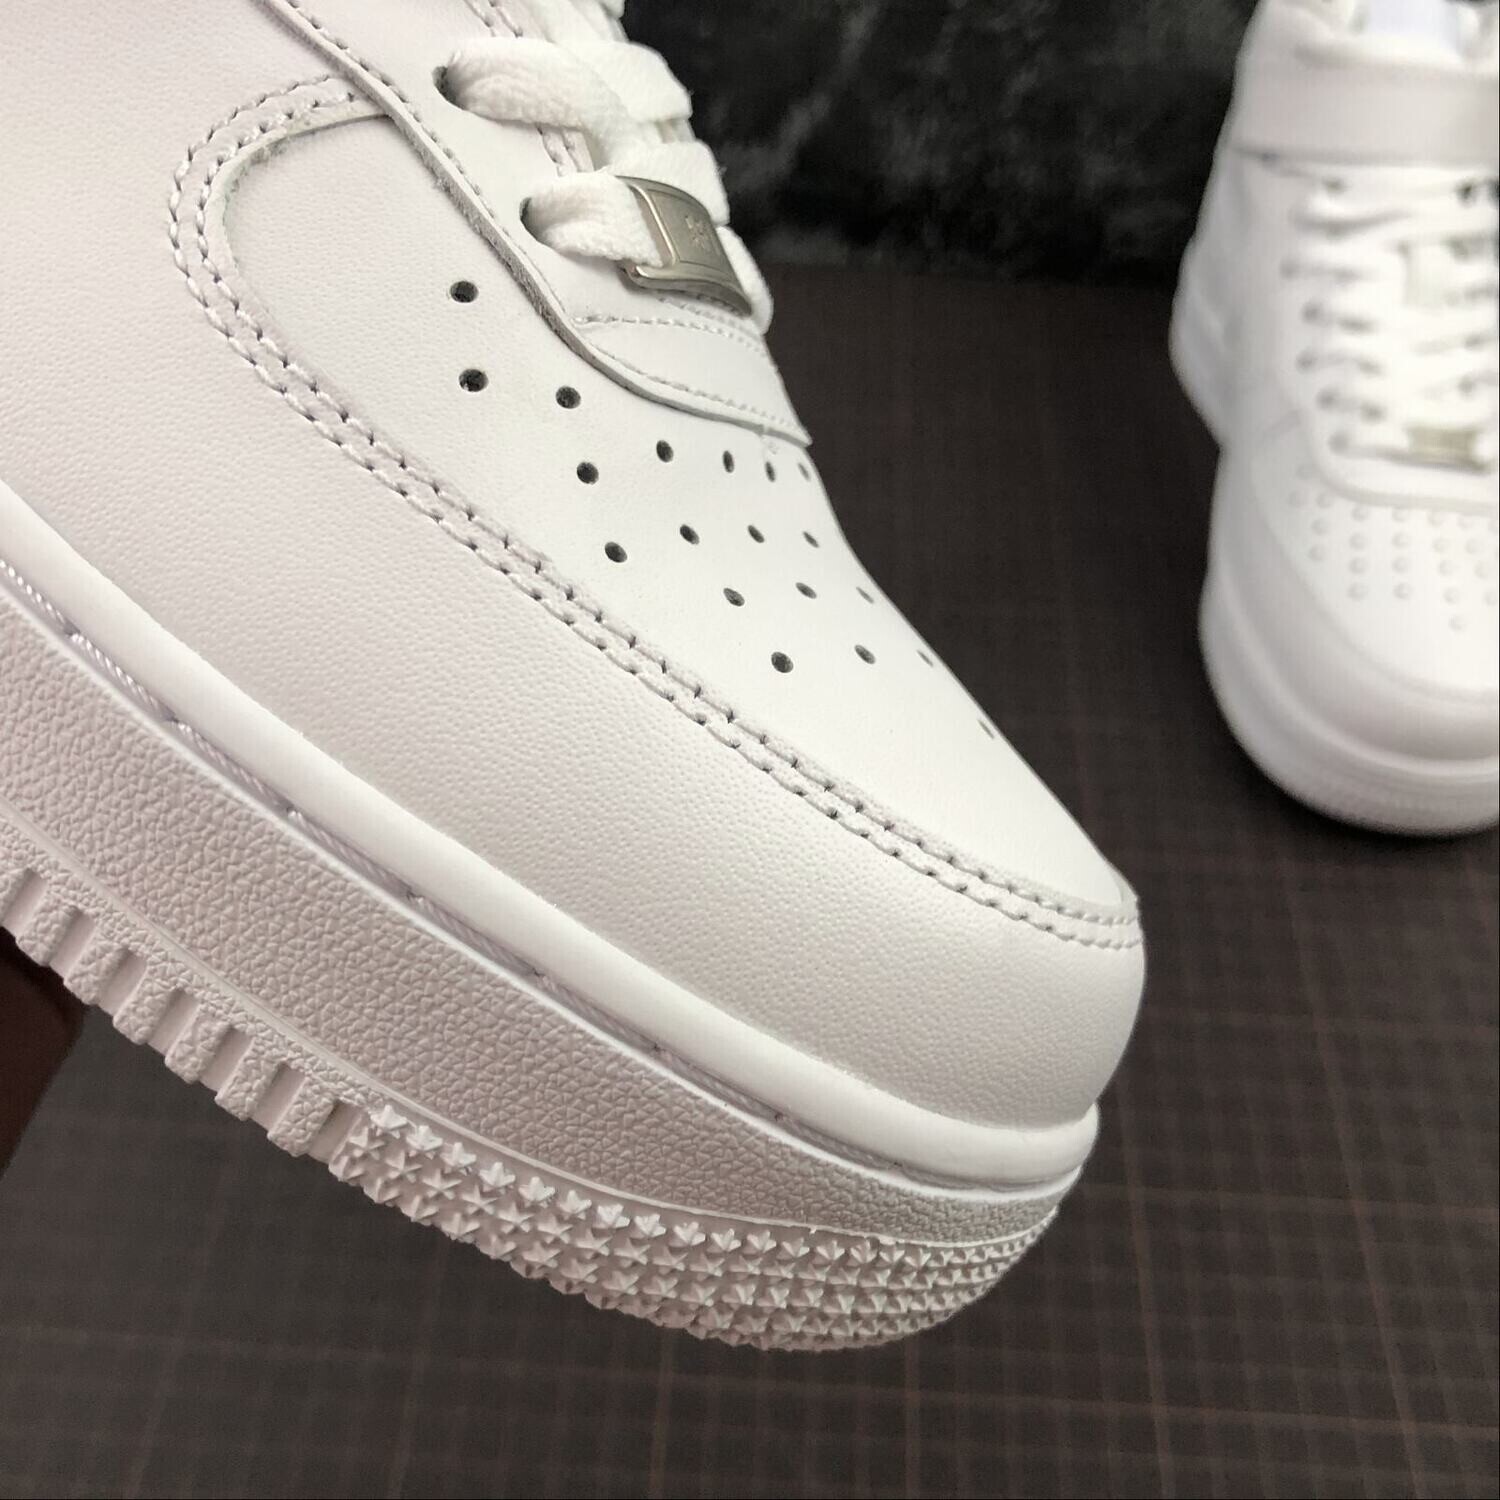 Nike Air force 1 Bianche ALTE